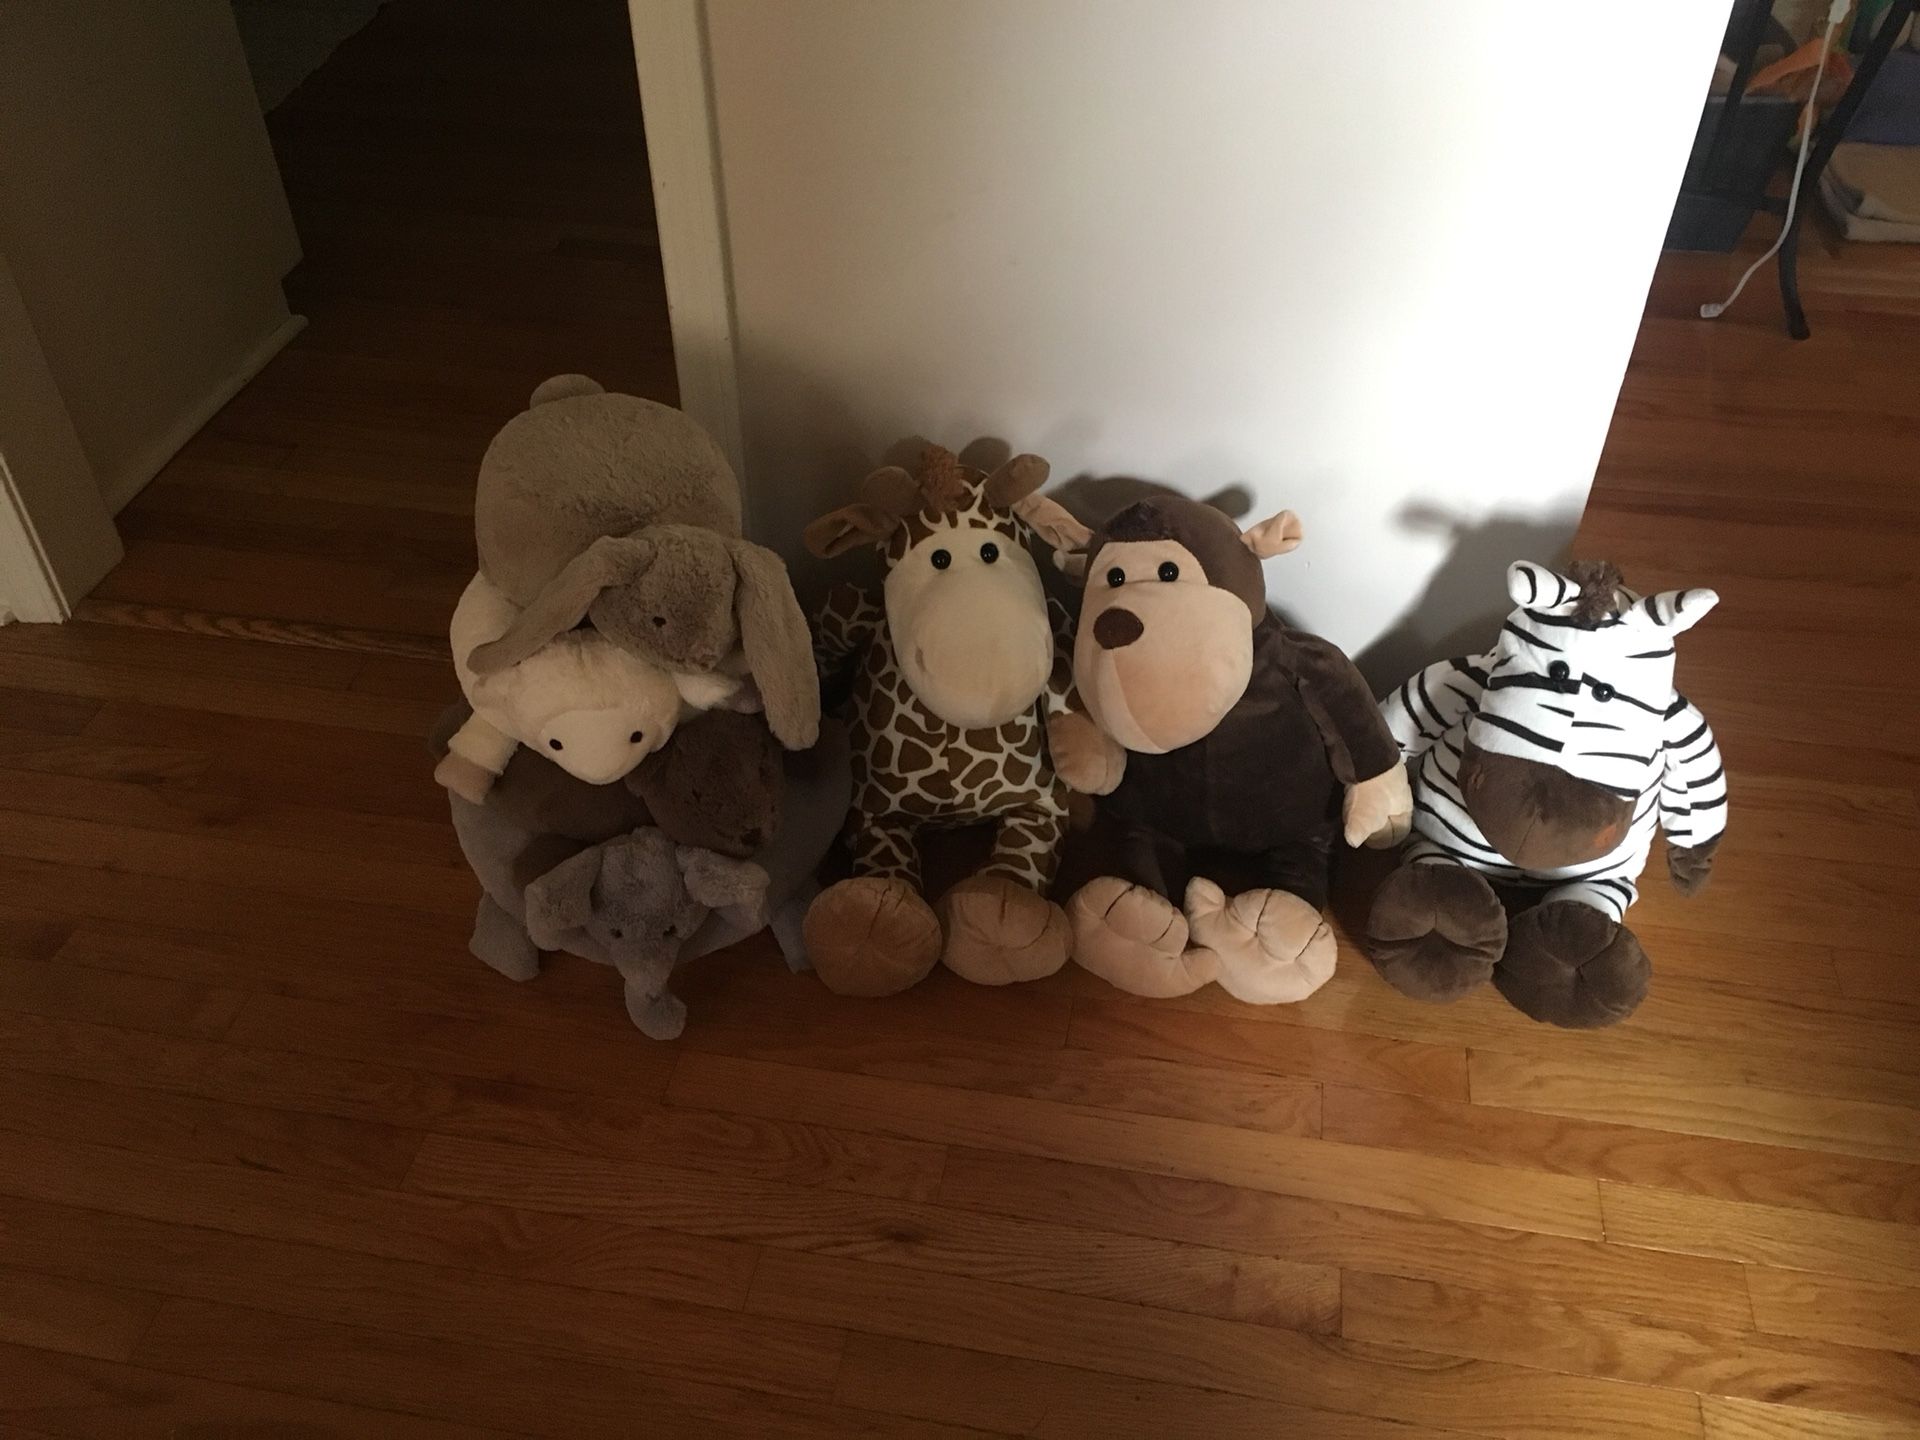 Pottery barn stacking toy and 3 large stuffed animals